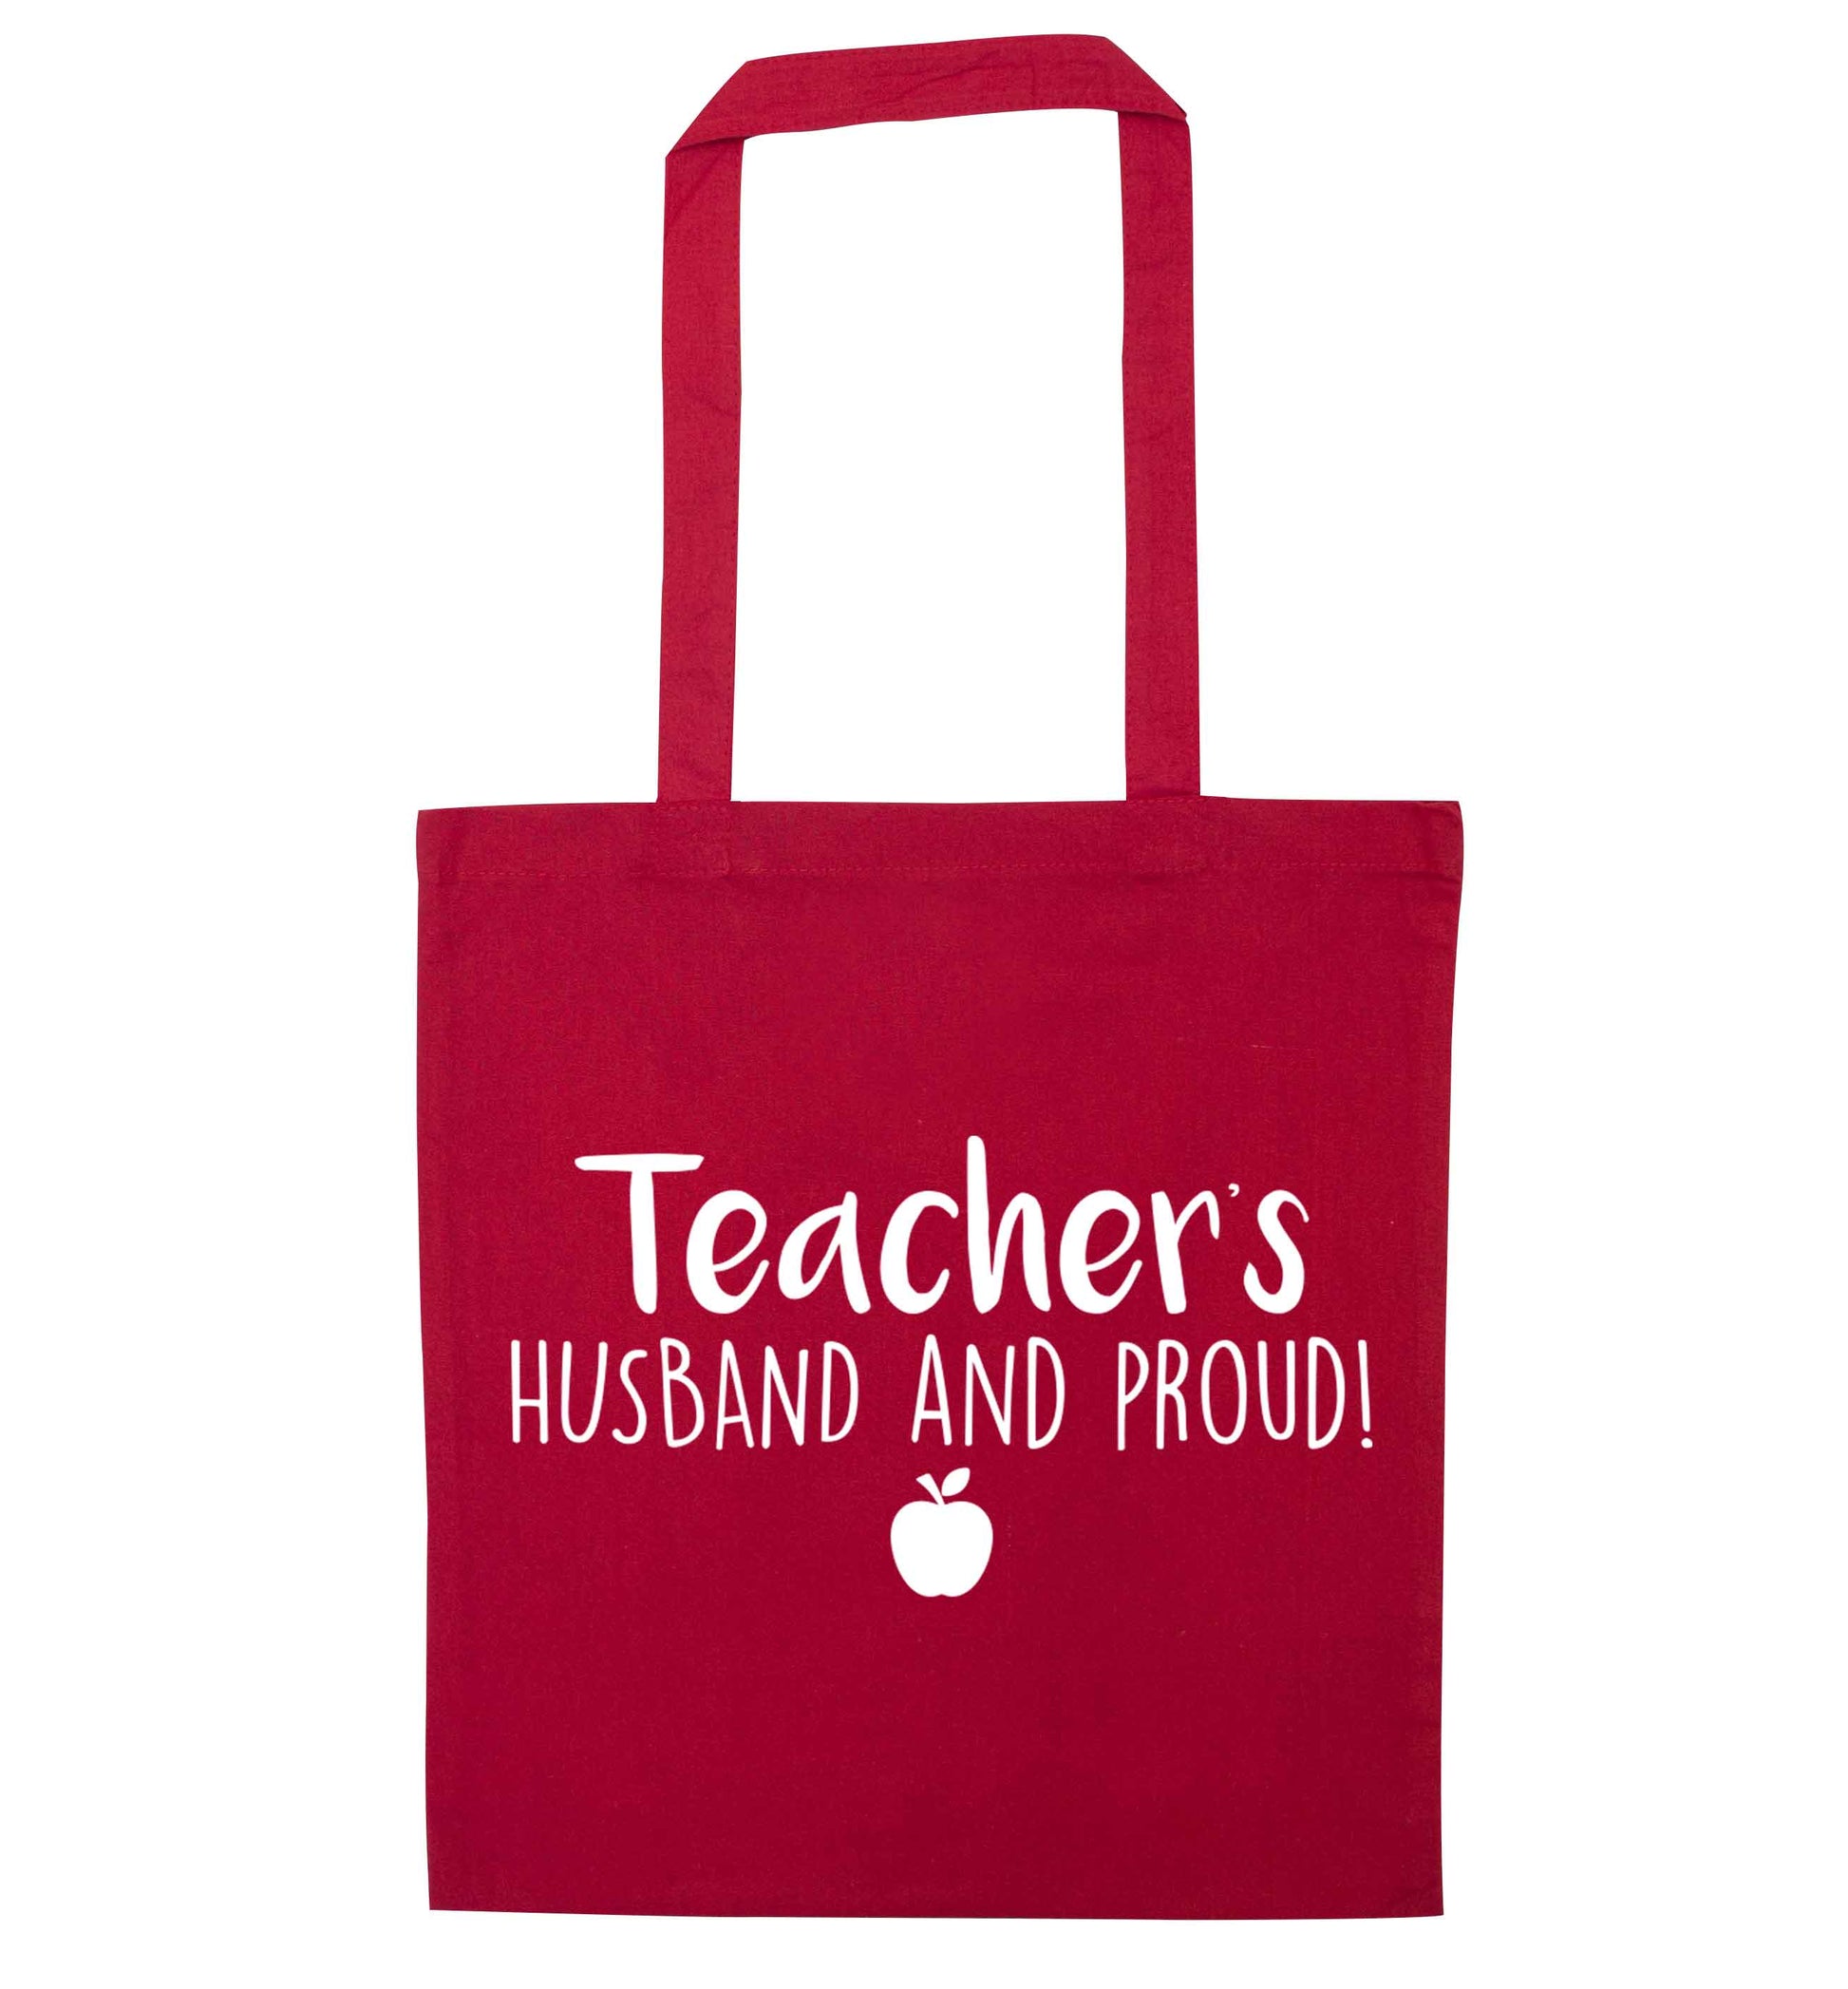 Teachers husband and proud red tote bag